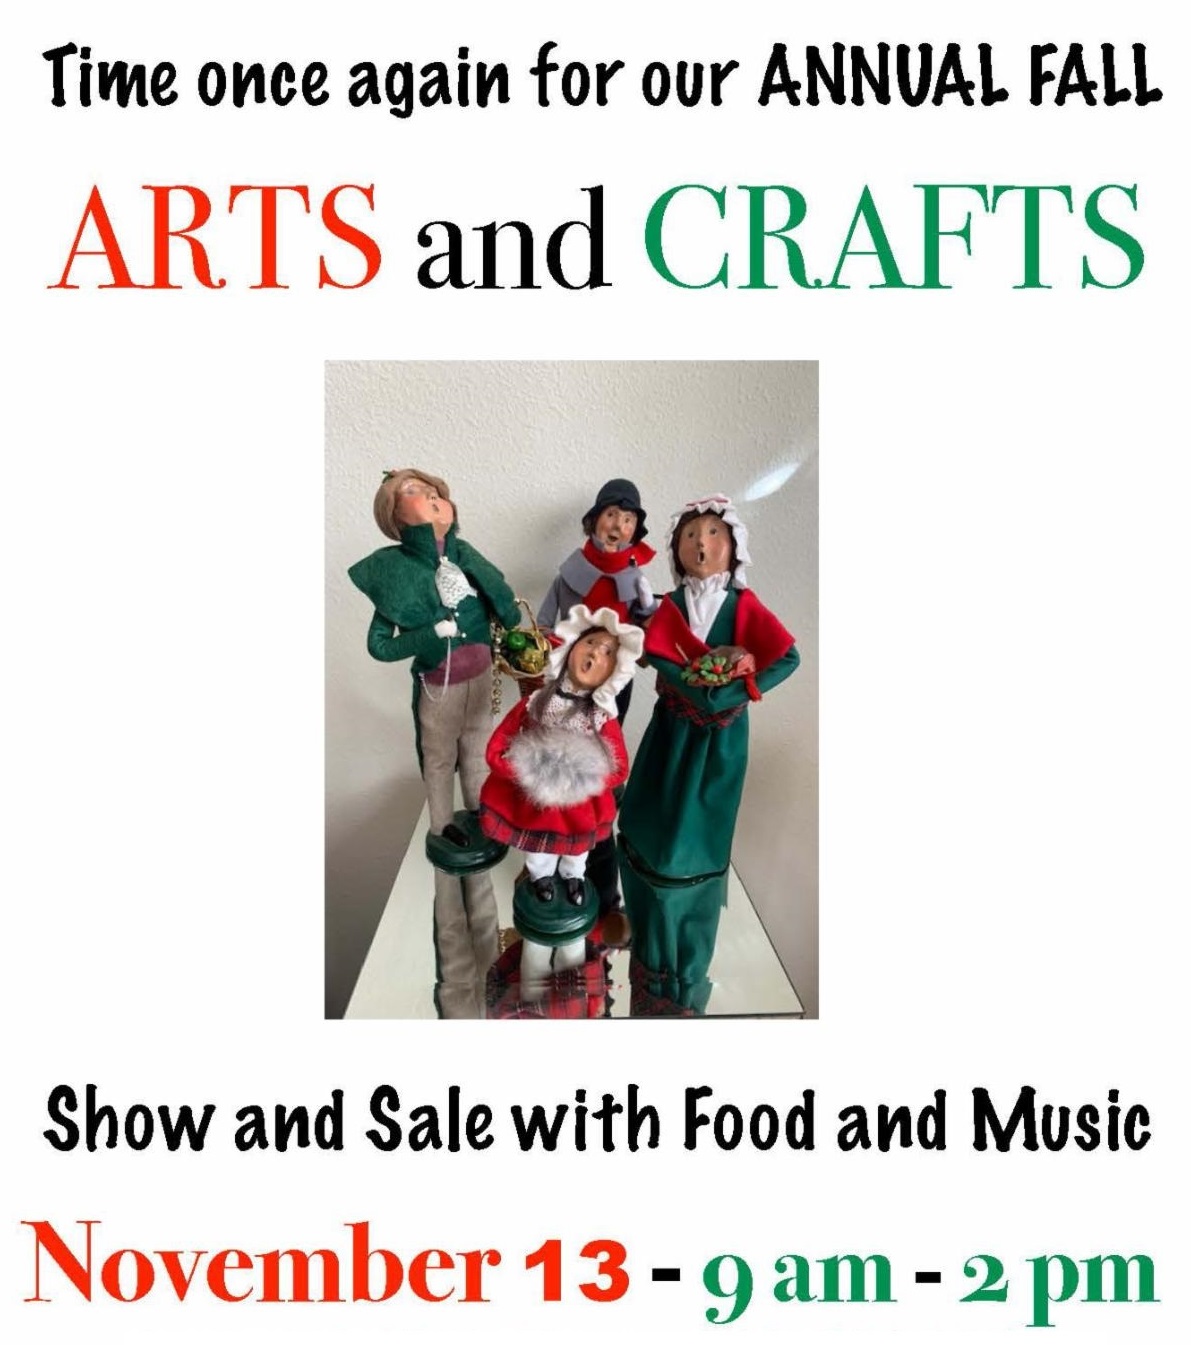 All Saints' Arts and Crafts Show flyer